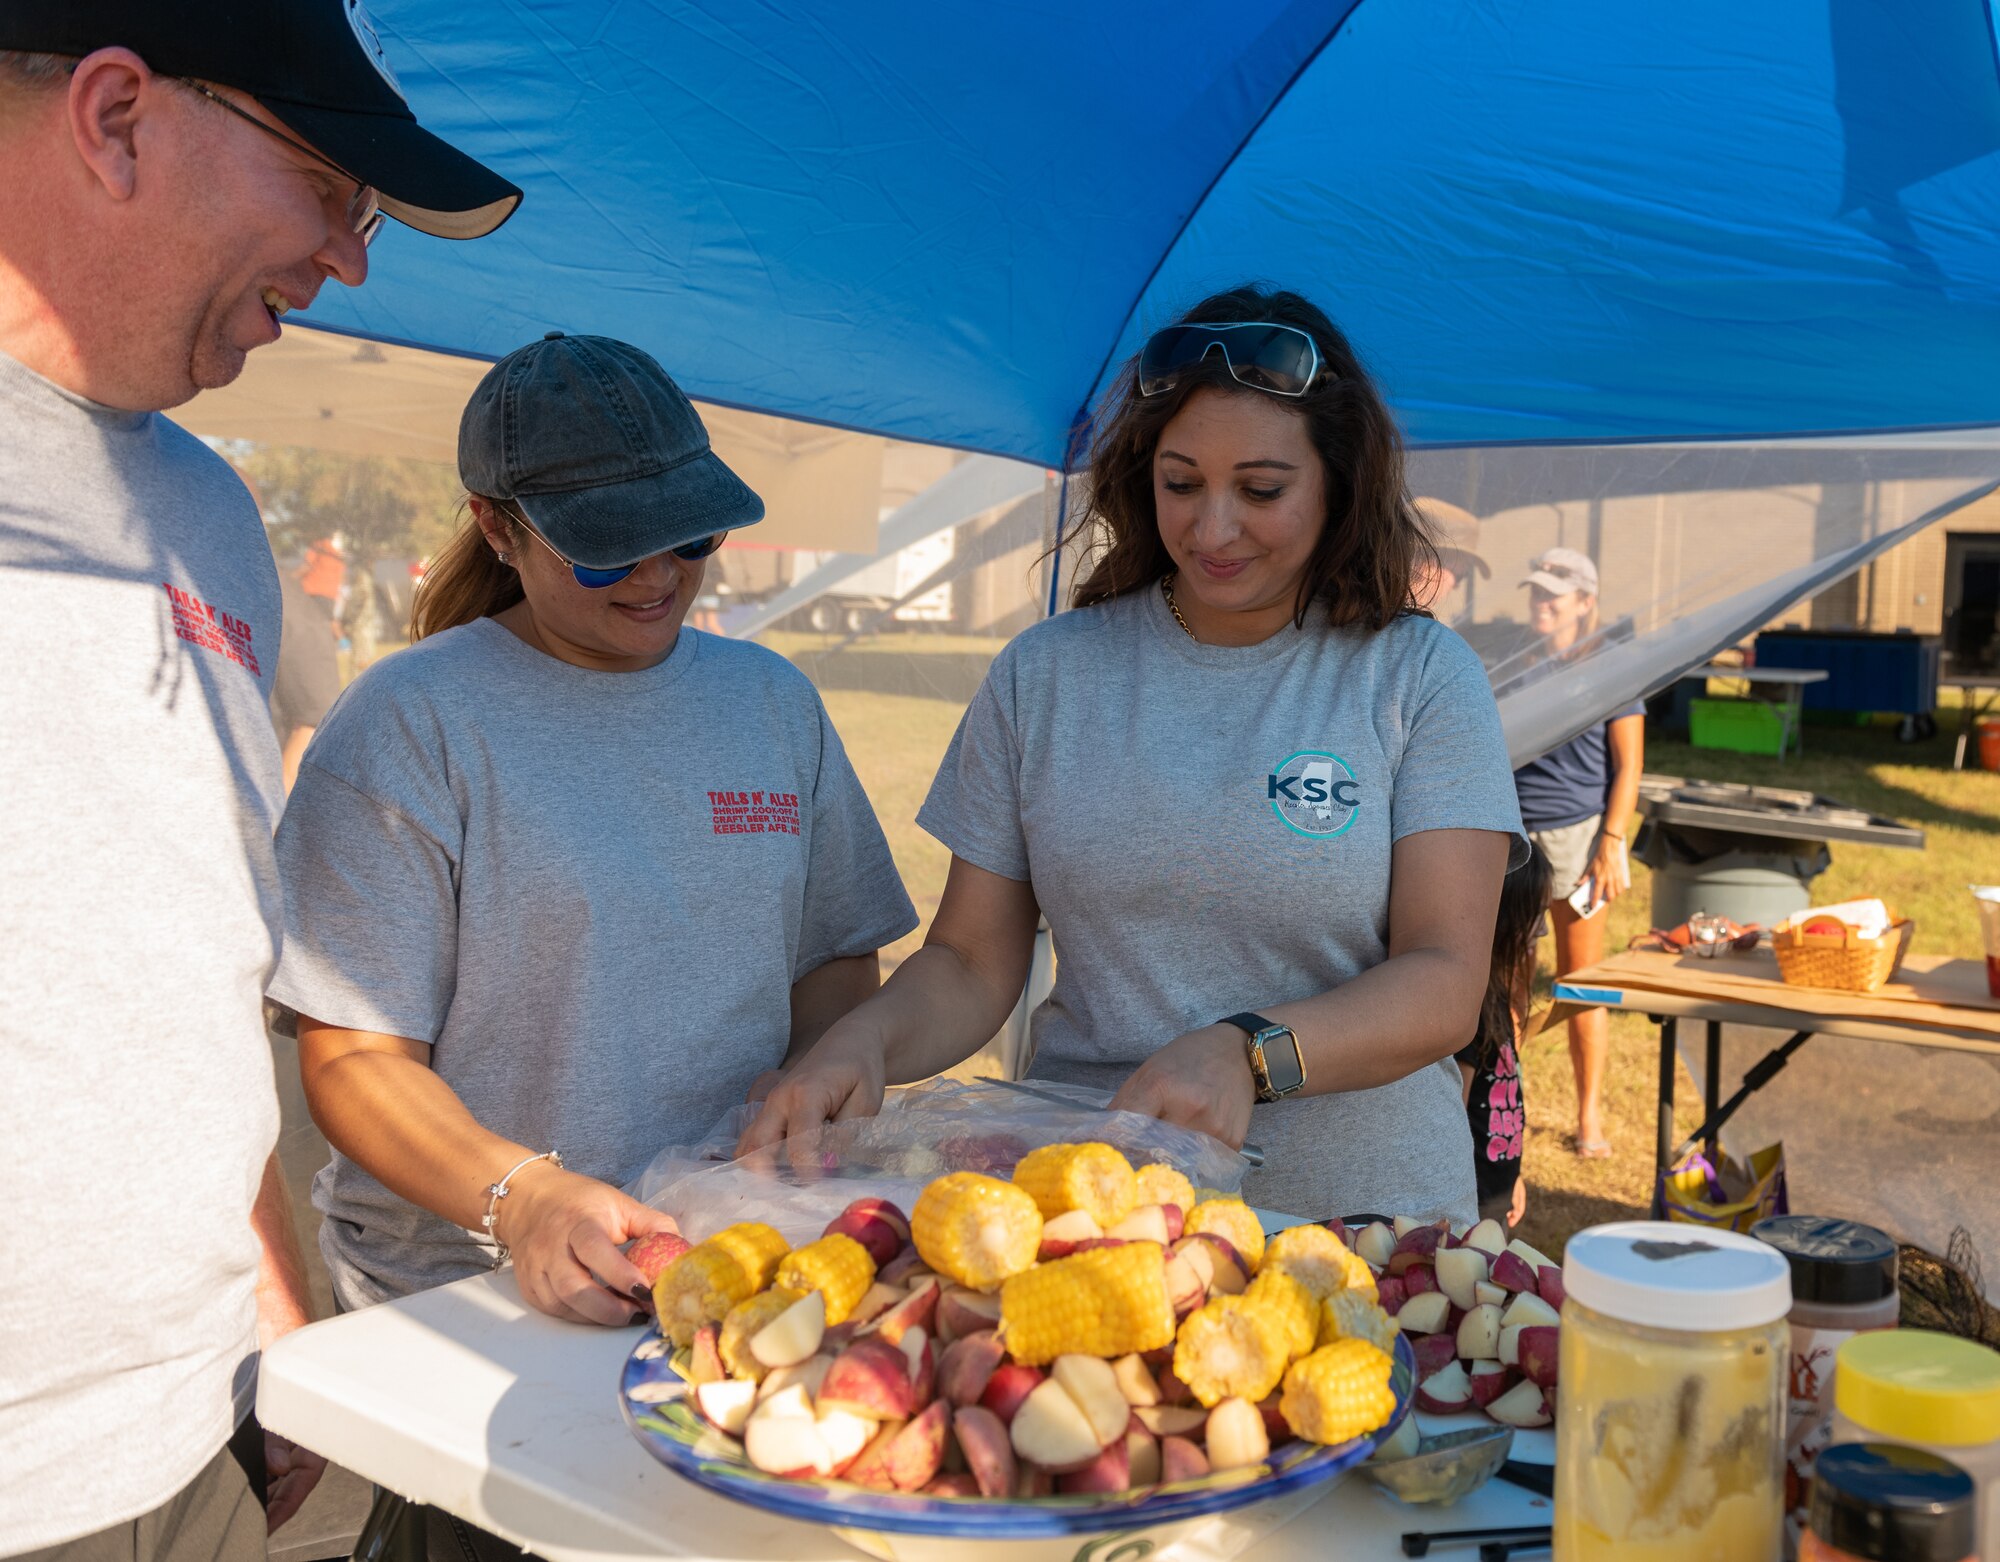 Members of the "Spicy Spouses" team prepare the 'fixins' during the Tails 'N Ales Annual Shrimp Cook-off outside the Bay Breeze Event Center at Keesler Air Force Base, Mississippi, Oct. 14, 2022. The 81st Force Support Squadron hosted event offered a variety of craft beers for tasting and many teams fighting for the ultimate best shrimp recipe. (U.S. Air Force photo by Andre' Askew)